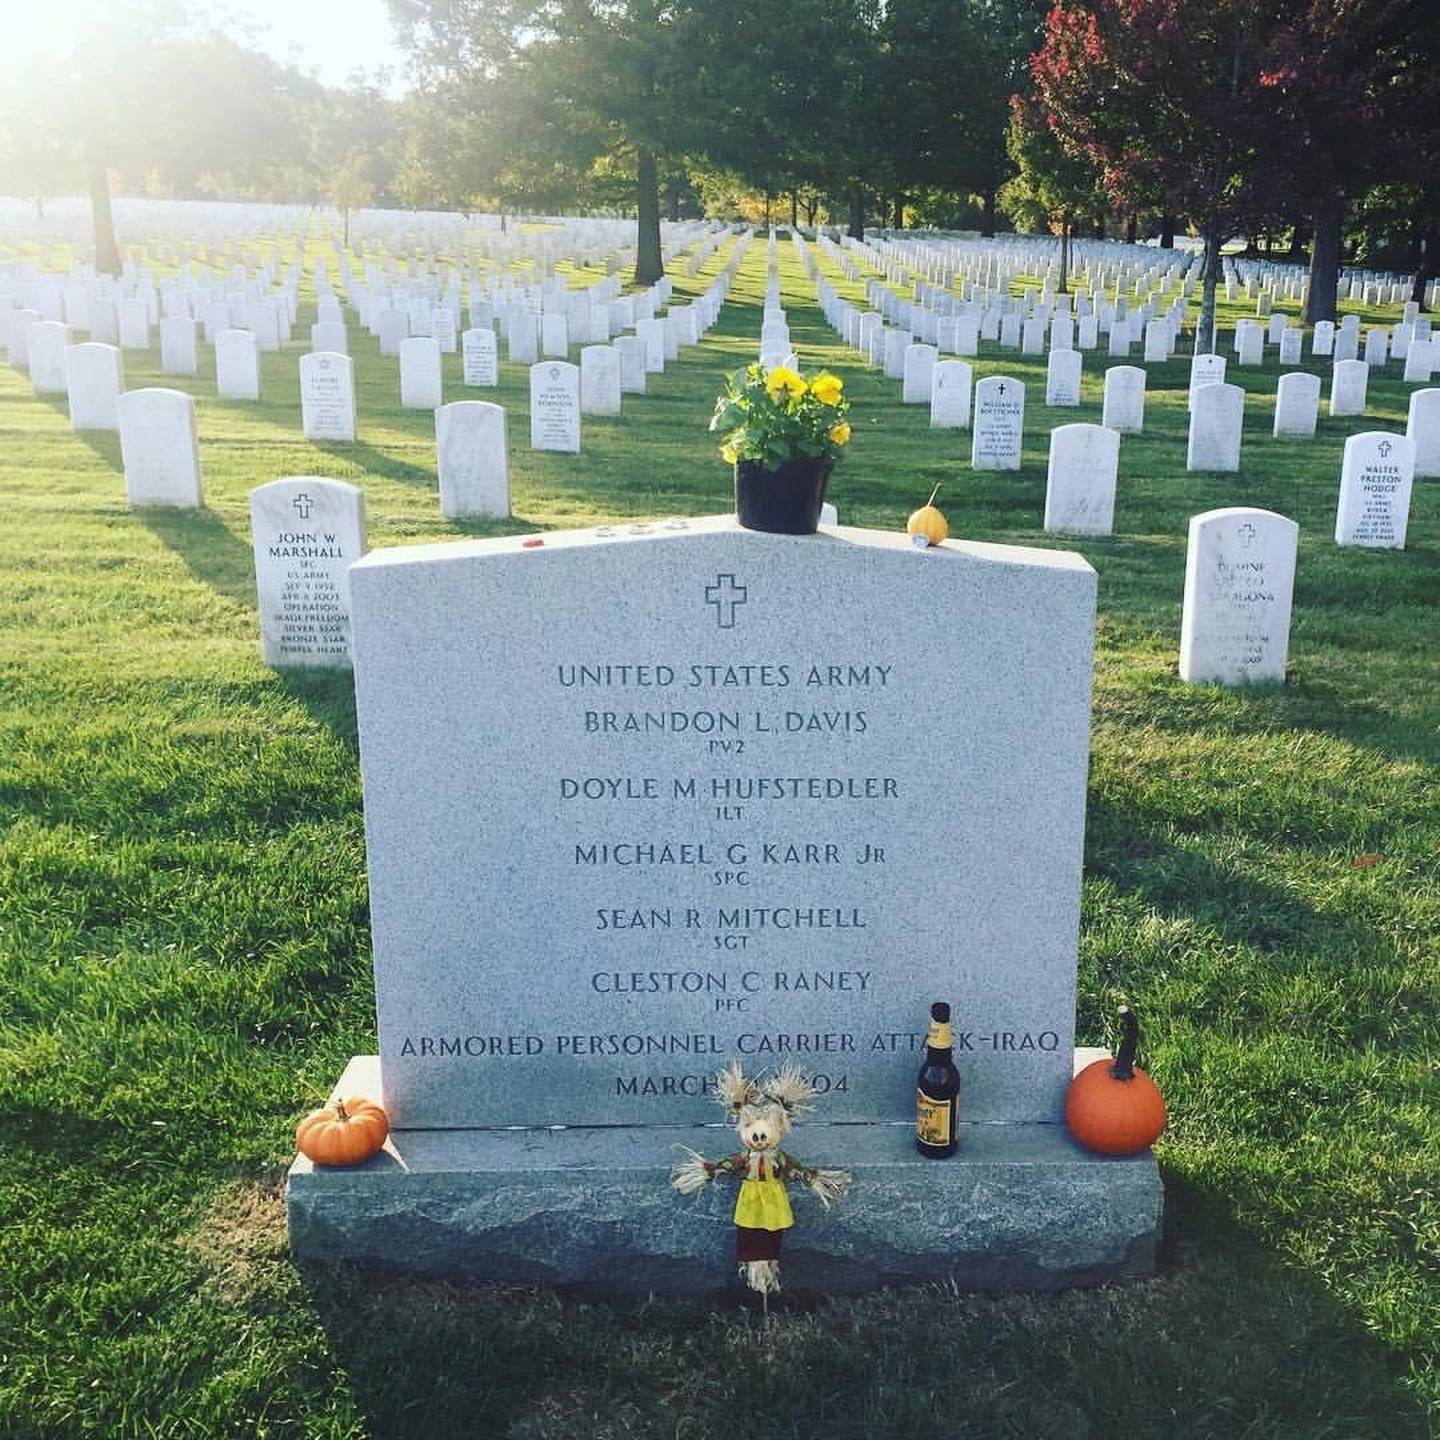 This undated photo shows the gravestone of 1st Lt. Doyle M. Hufstedler and the four soldiers who died with him in Iraq at Arlington National Cemetery.